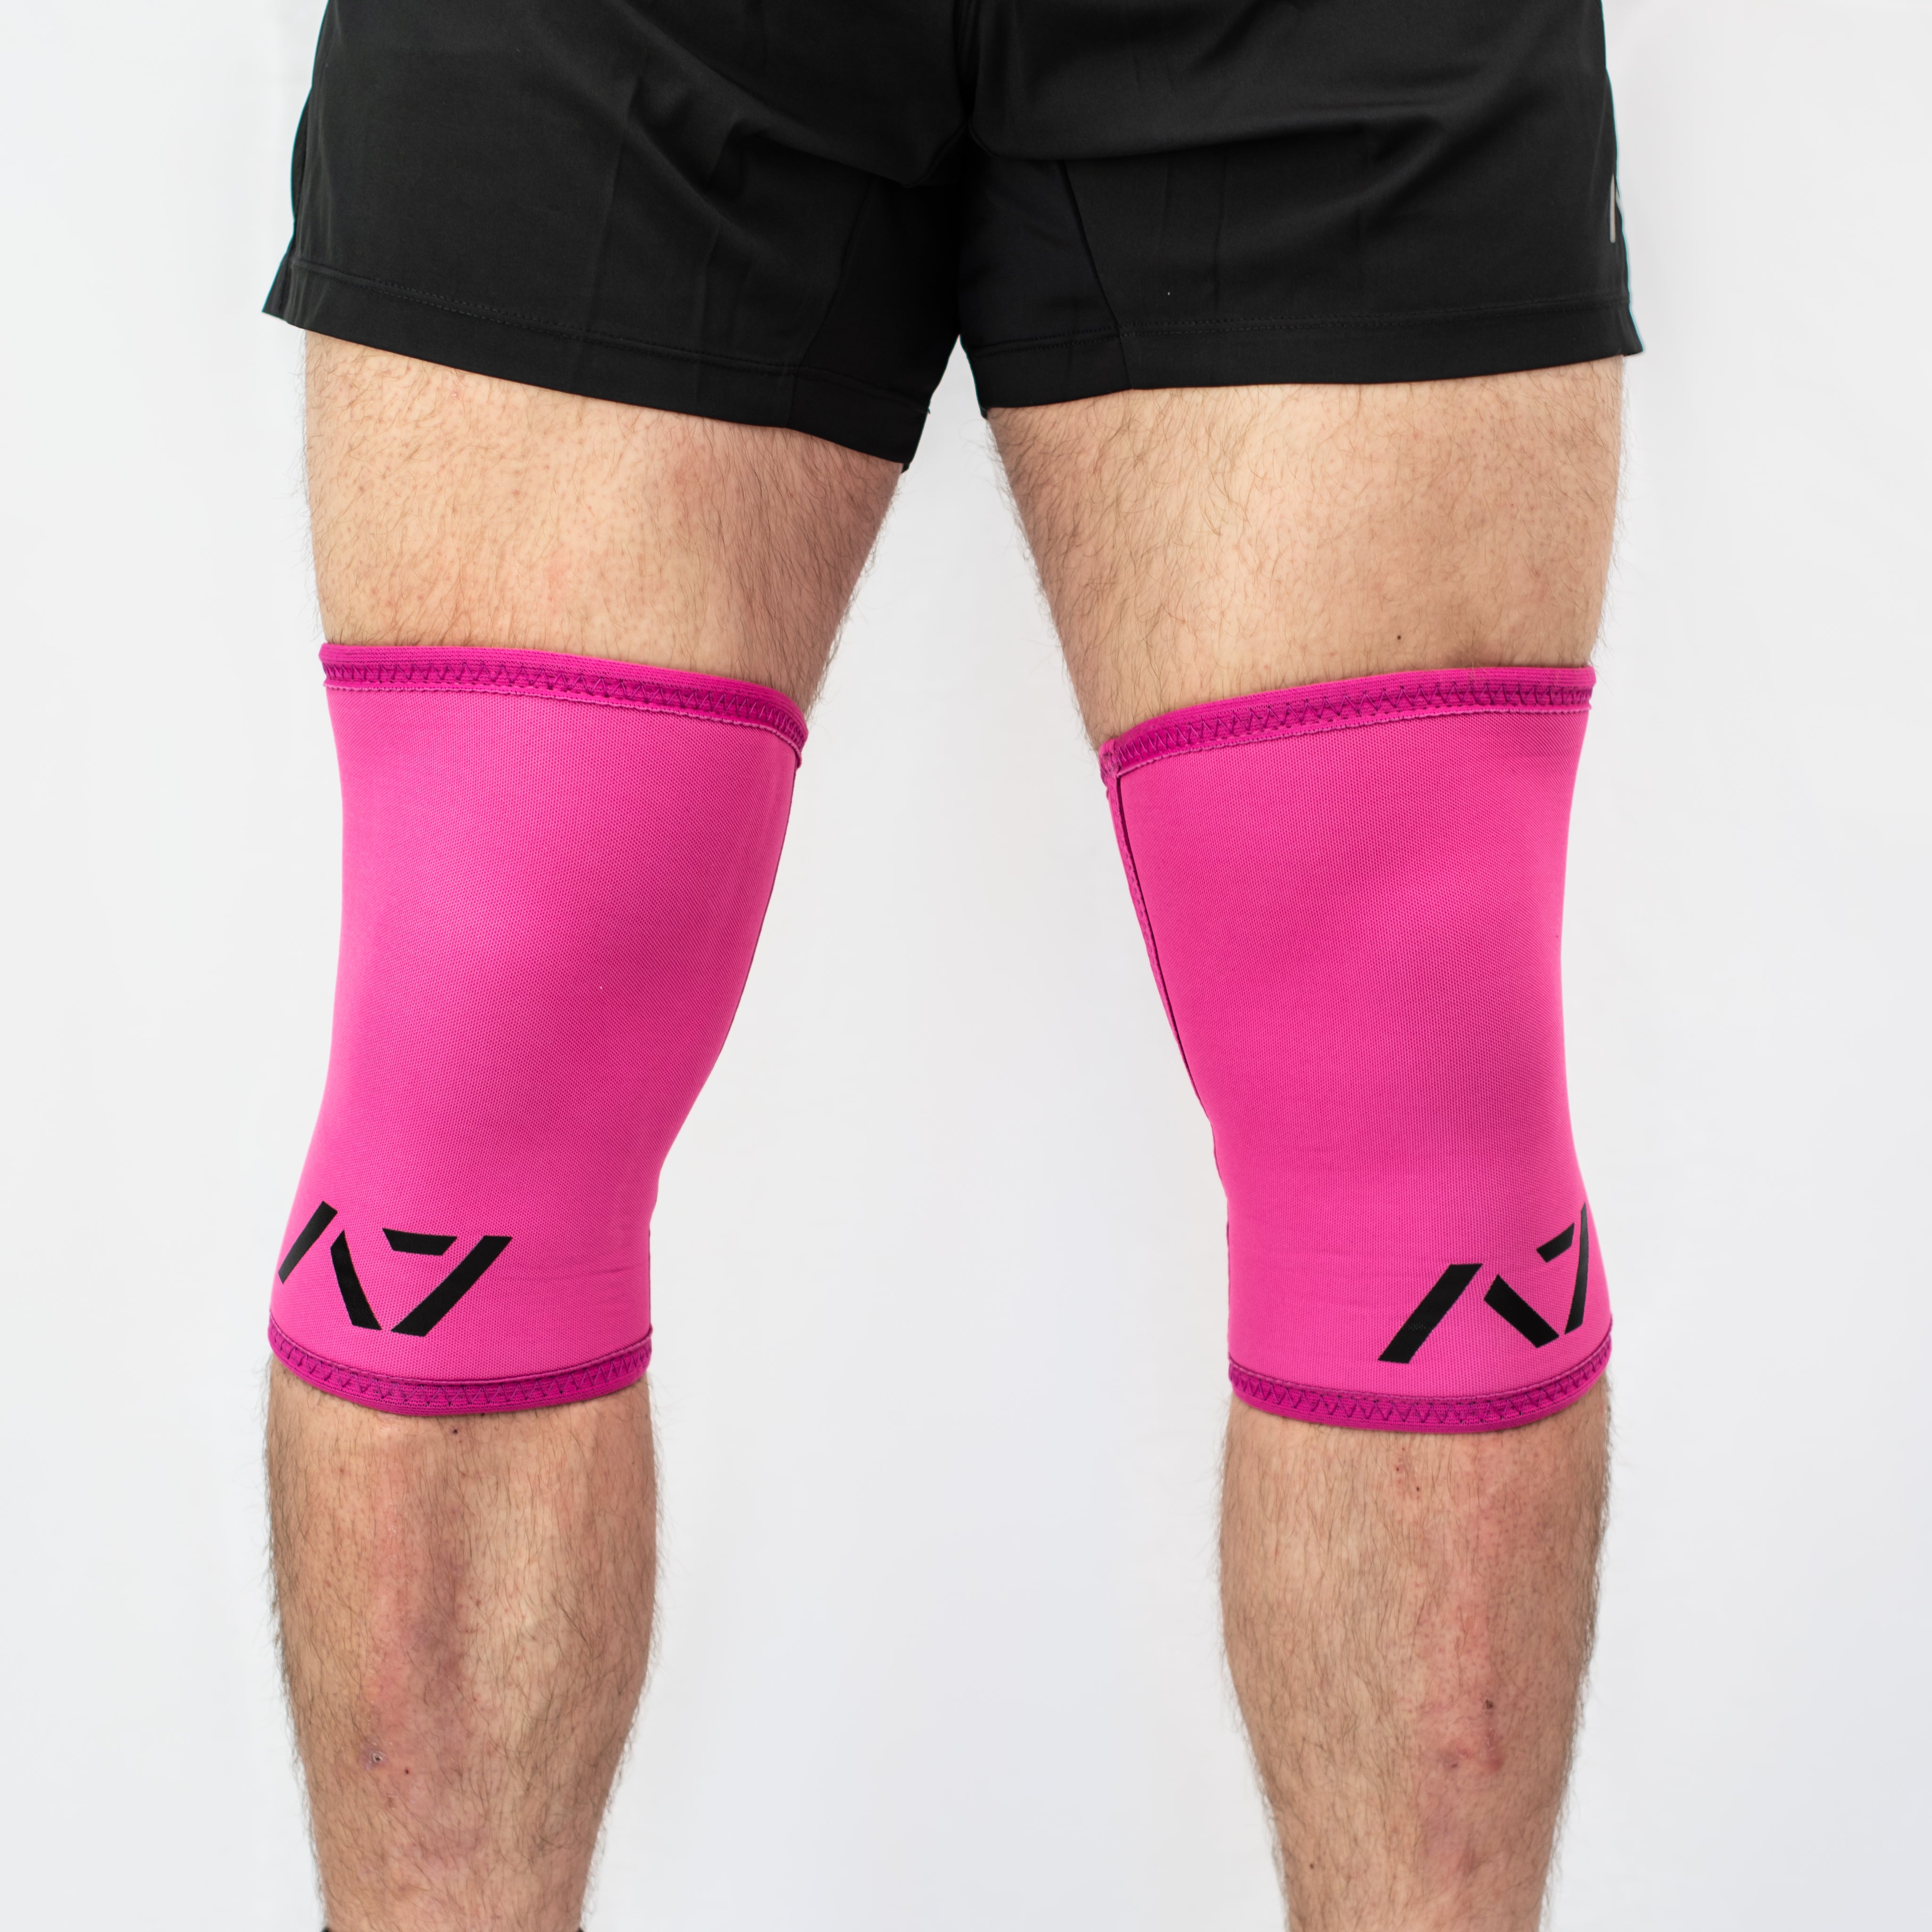 Tahiti kom videre offentlig CONE Pink Knee Compression Sleeves - USPA & IPF Approved – A7